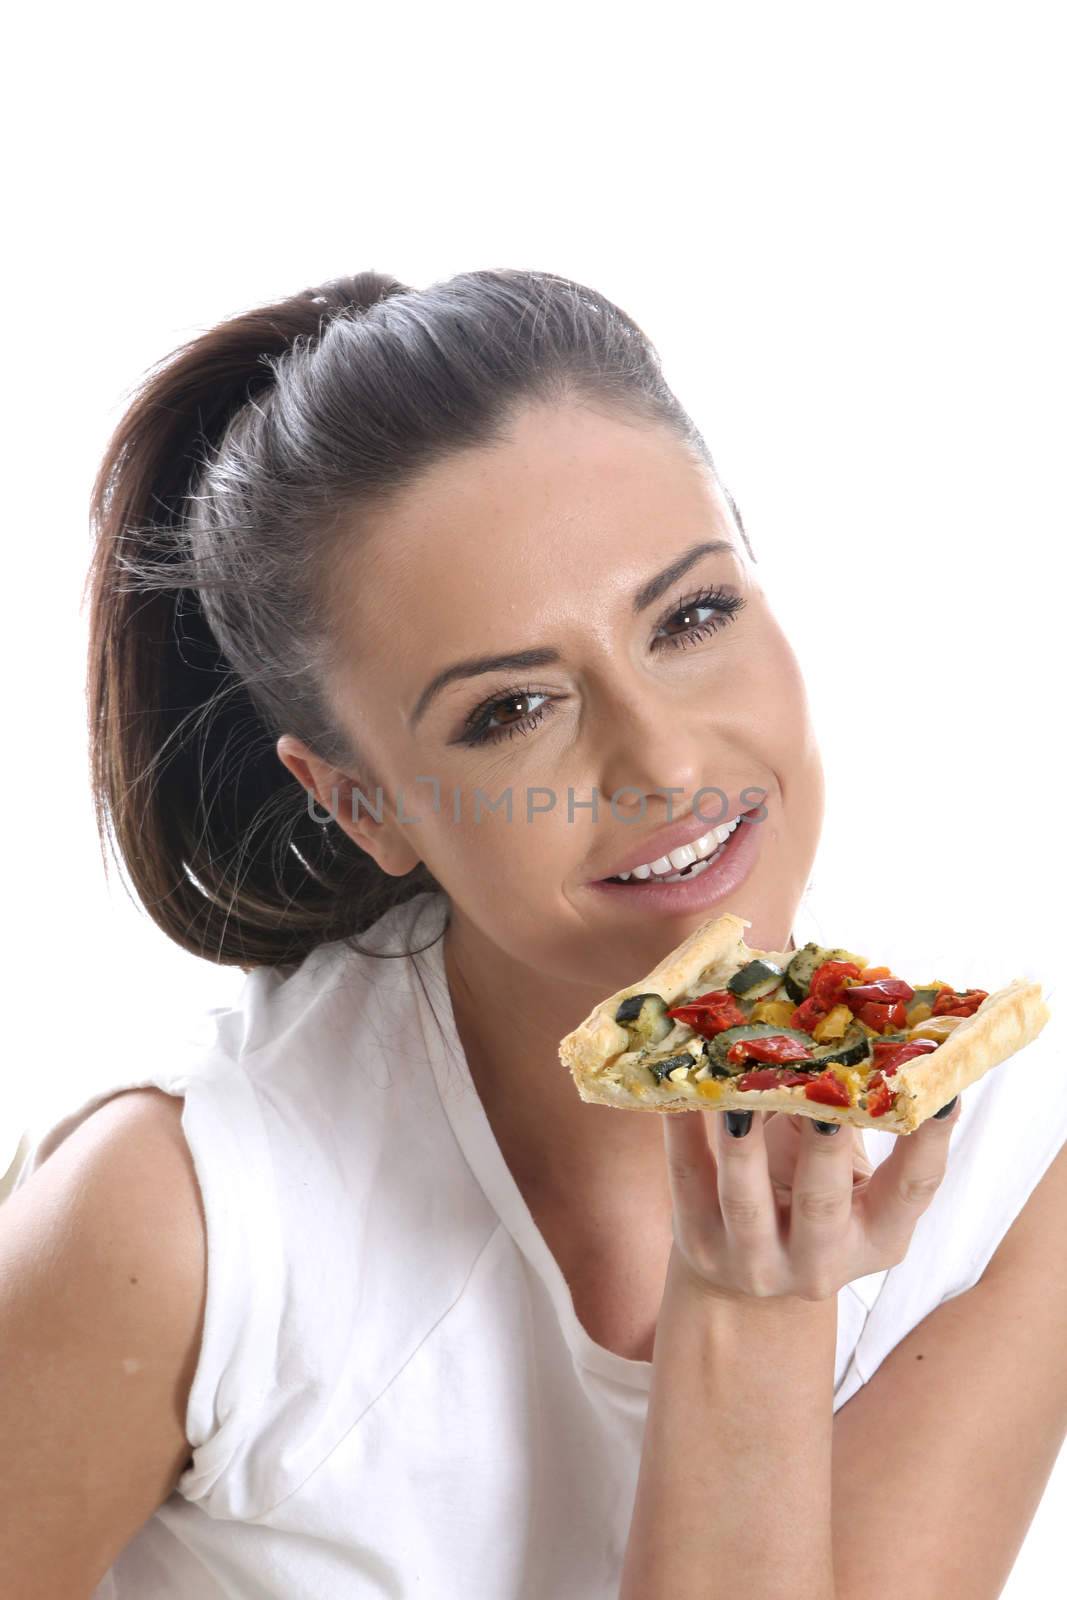 Model Released. Young Woman Eating Vegetable Pastry Tart